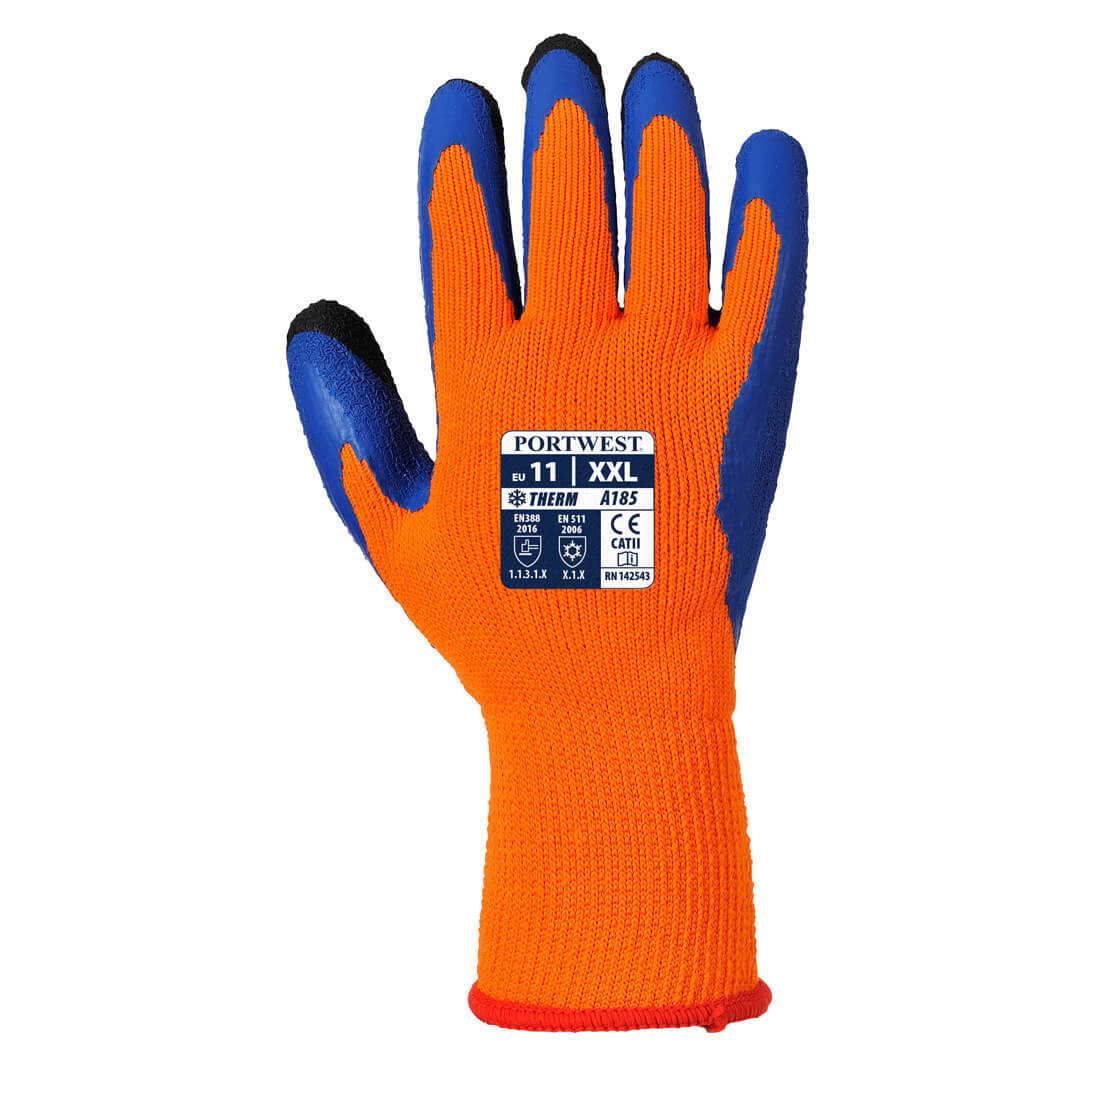 Glove Duo-Therm - Personal protection